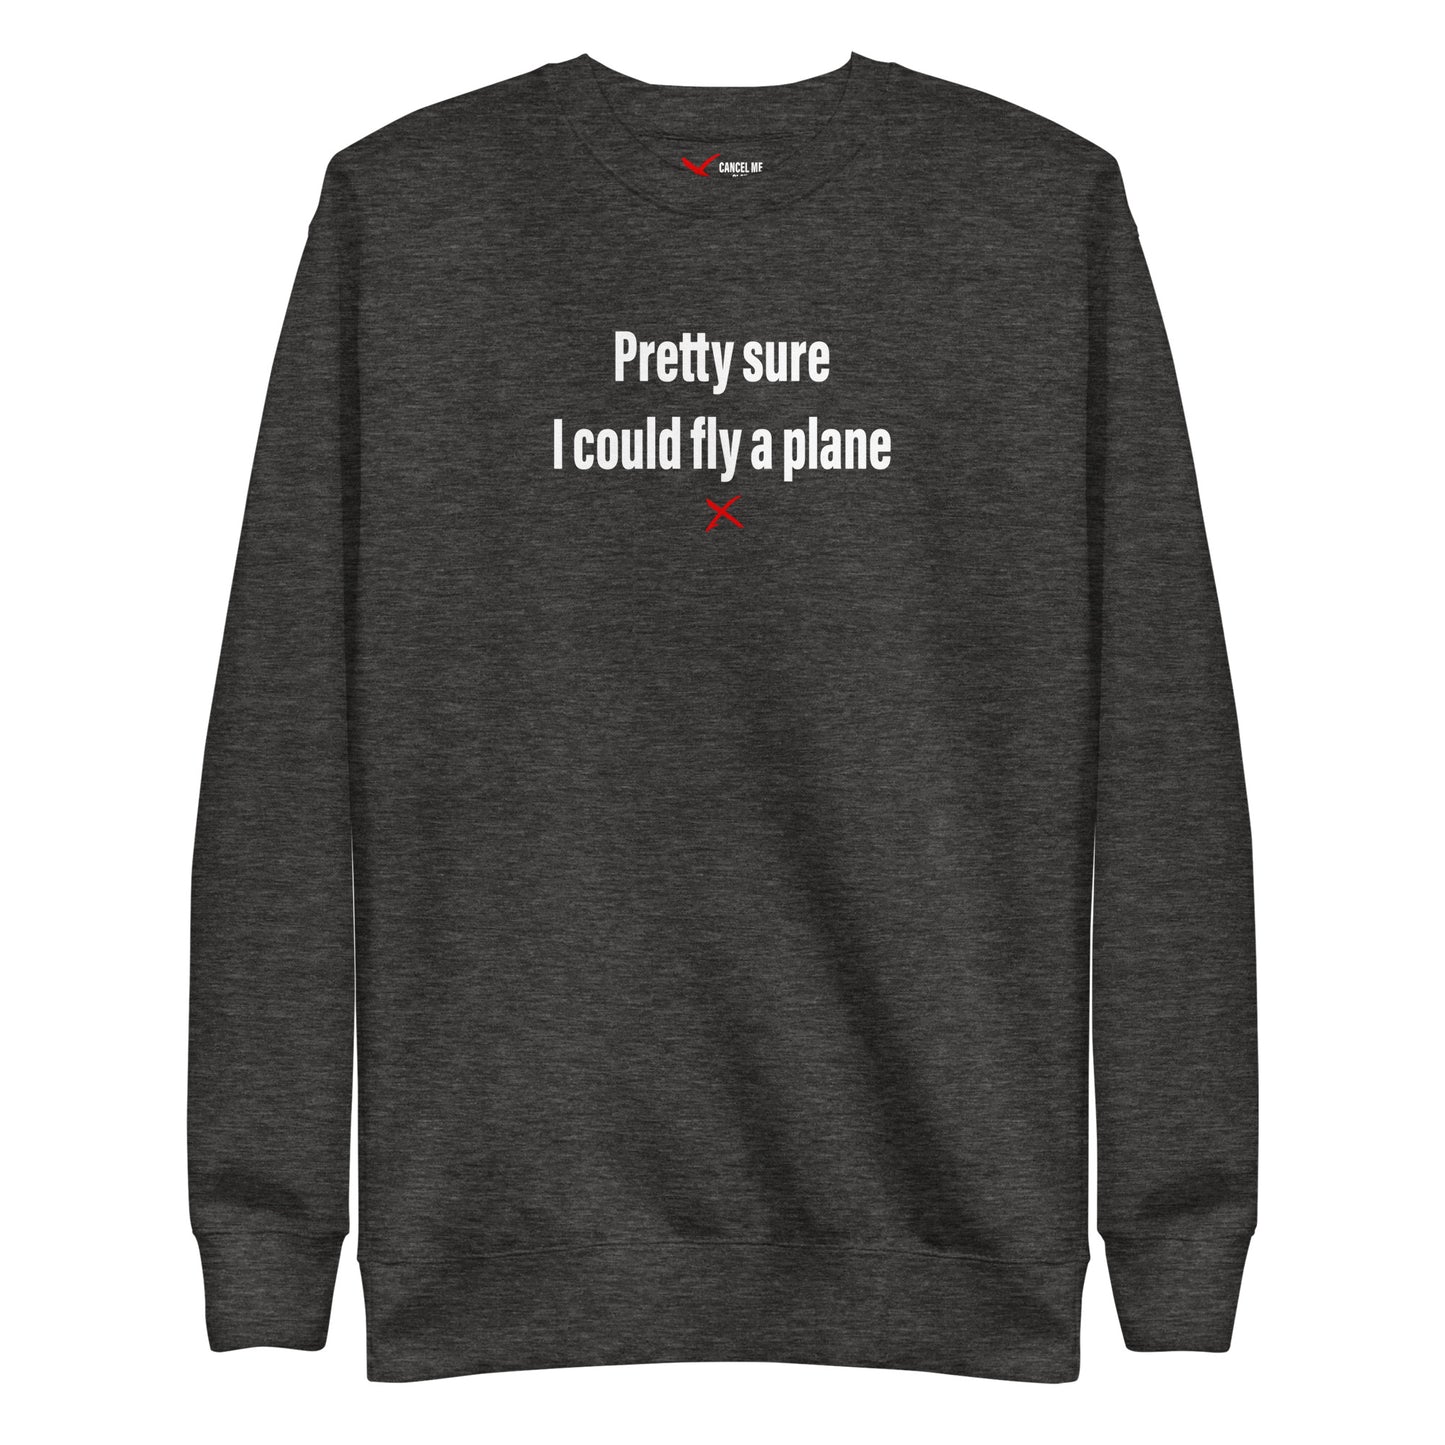 Pretty sure I could fly a plane - Sweatshirt